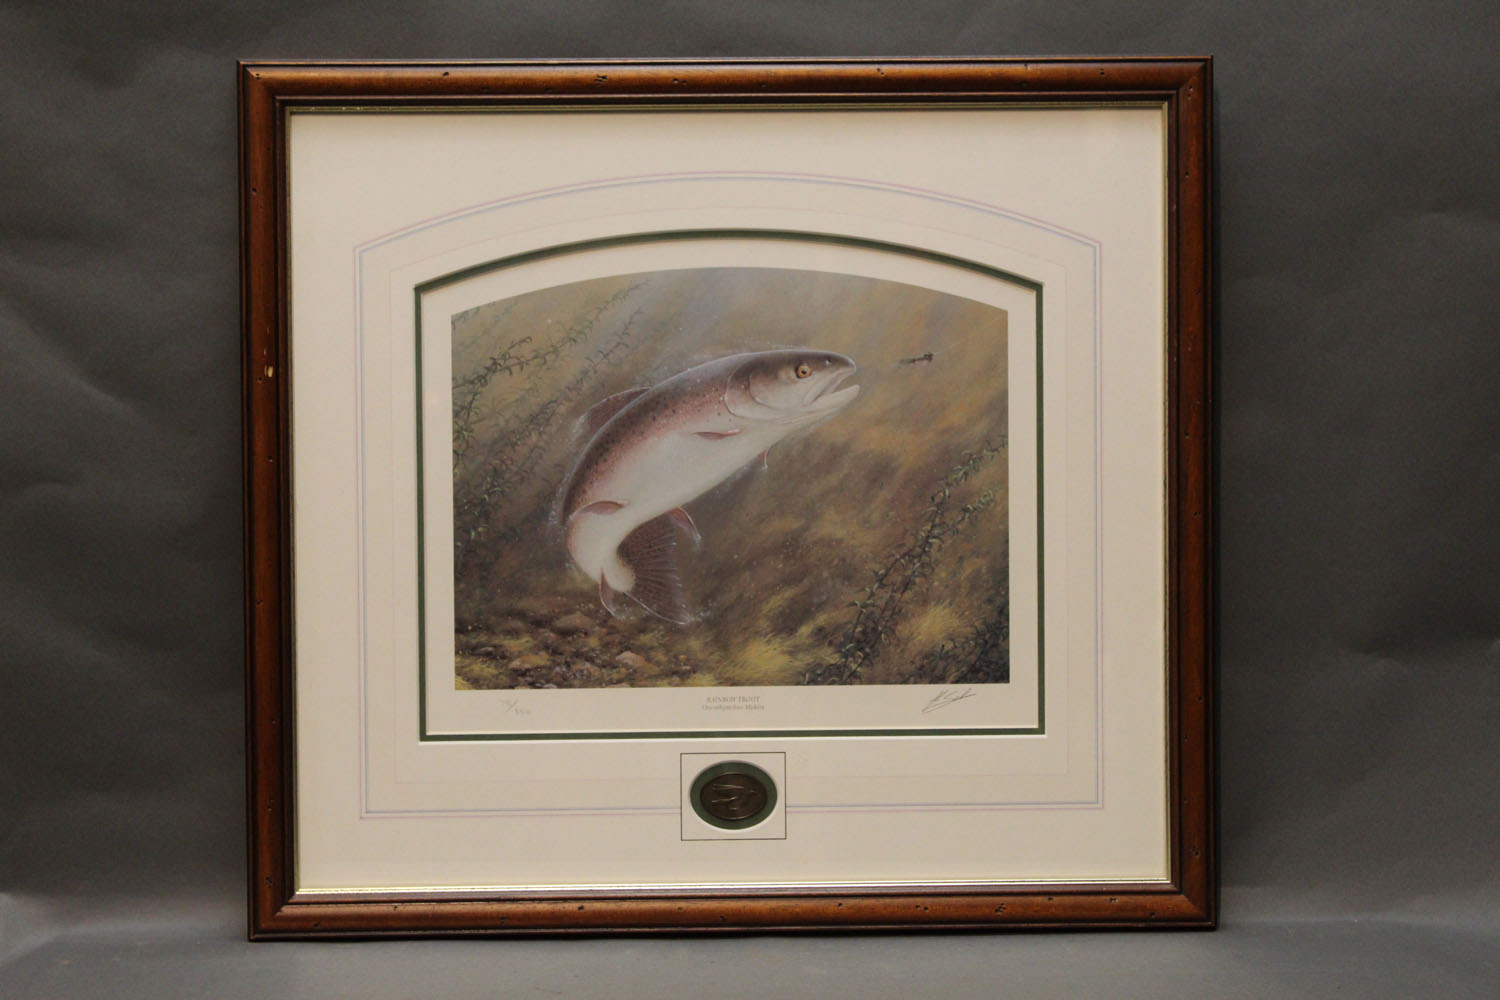 John Silver signed Limited Edition prints, "Rainbow Trout" with a Washington Green blind stamp,